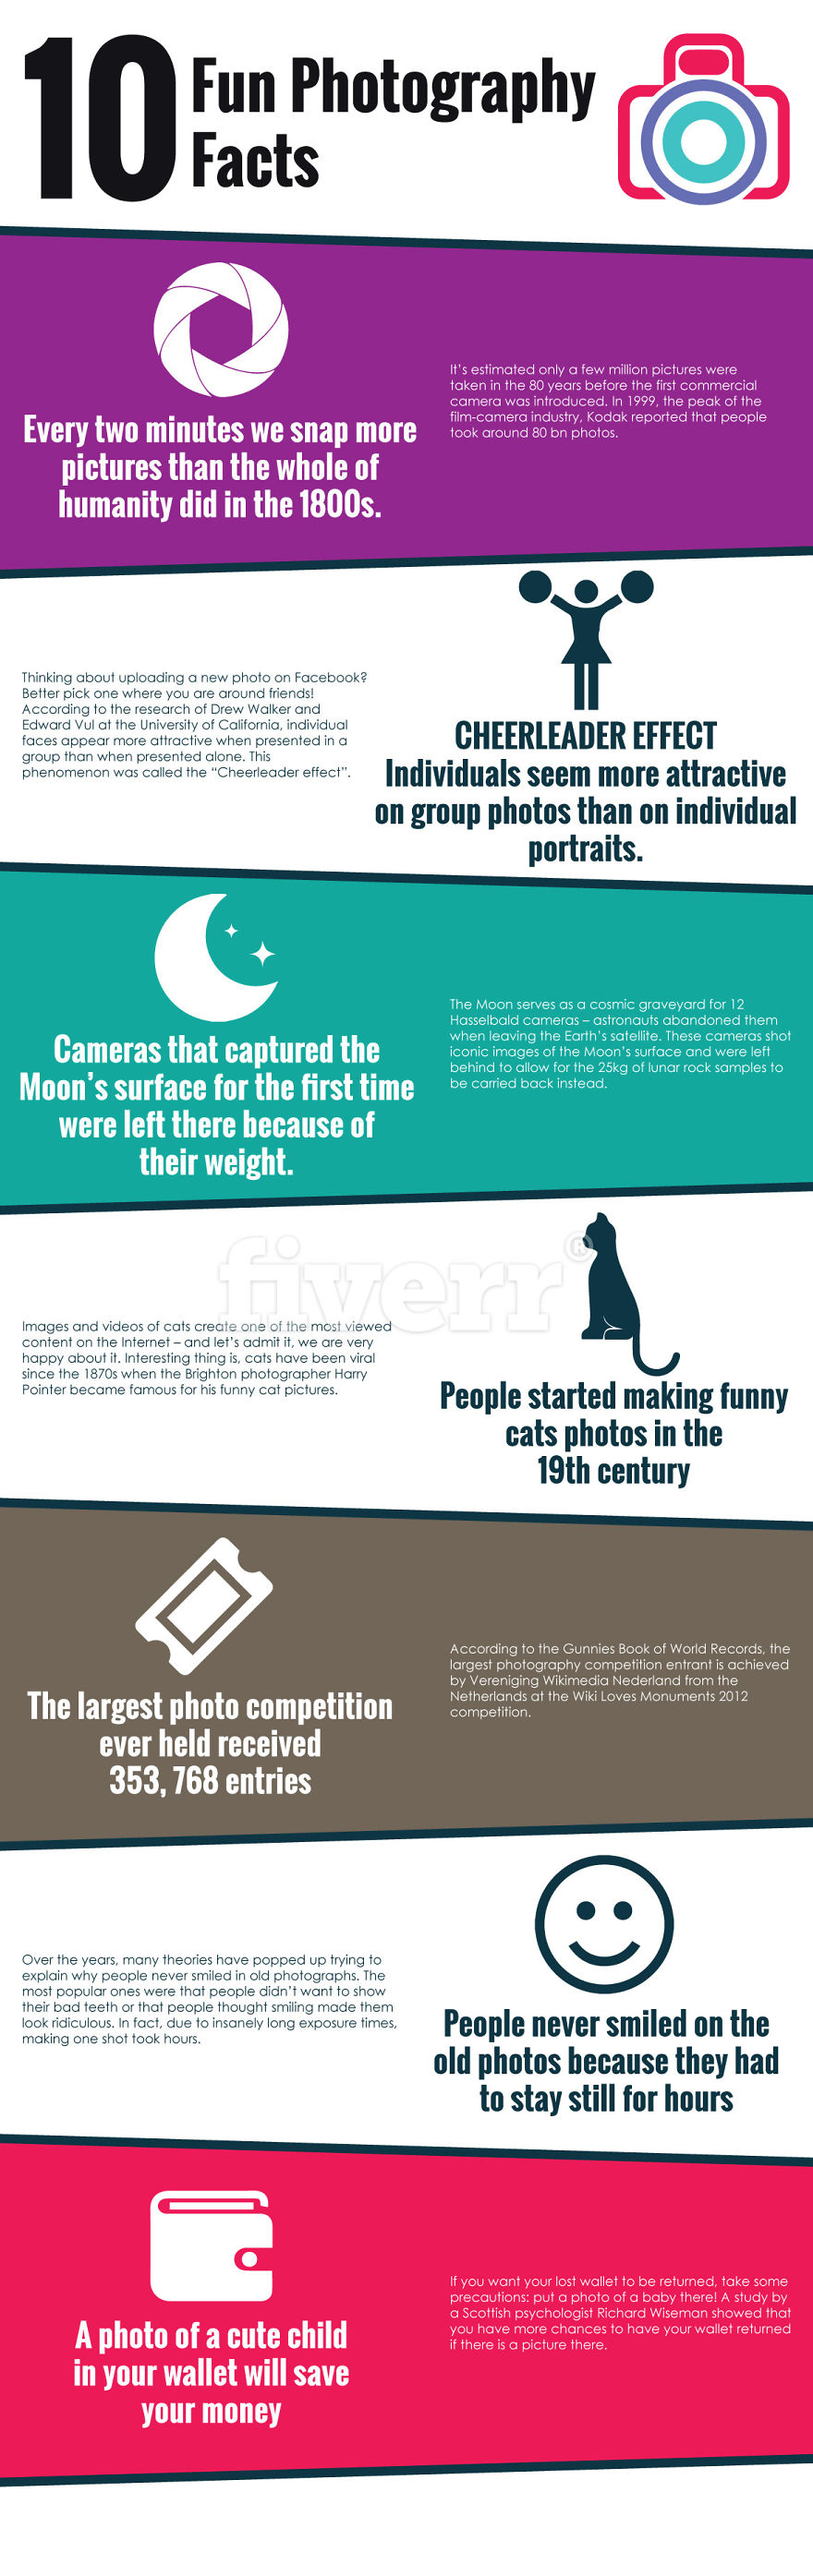 10 Amusing Facts About Photography